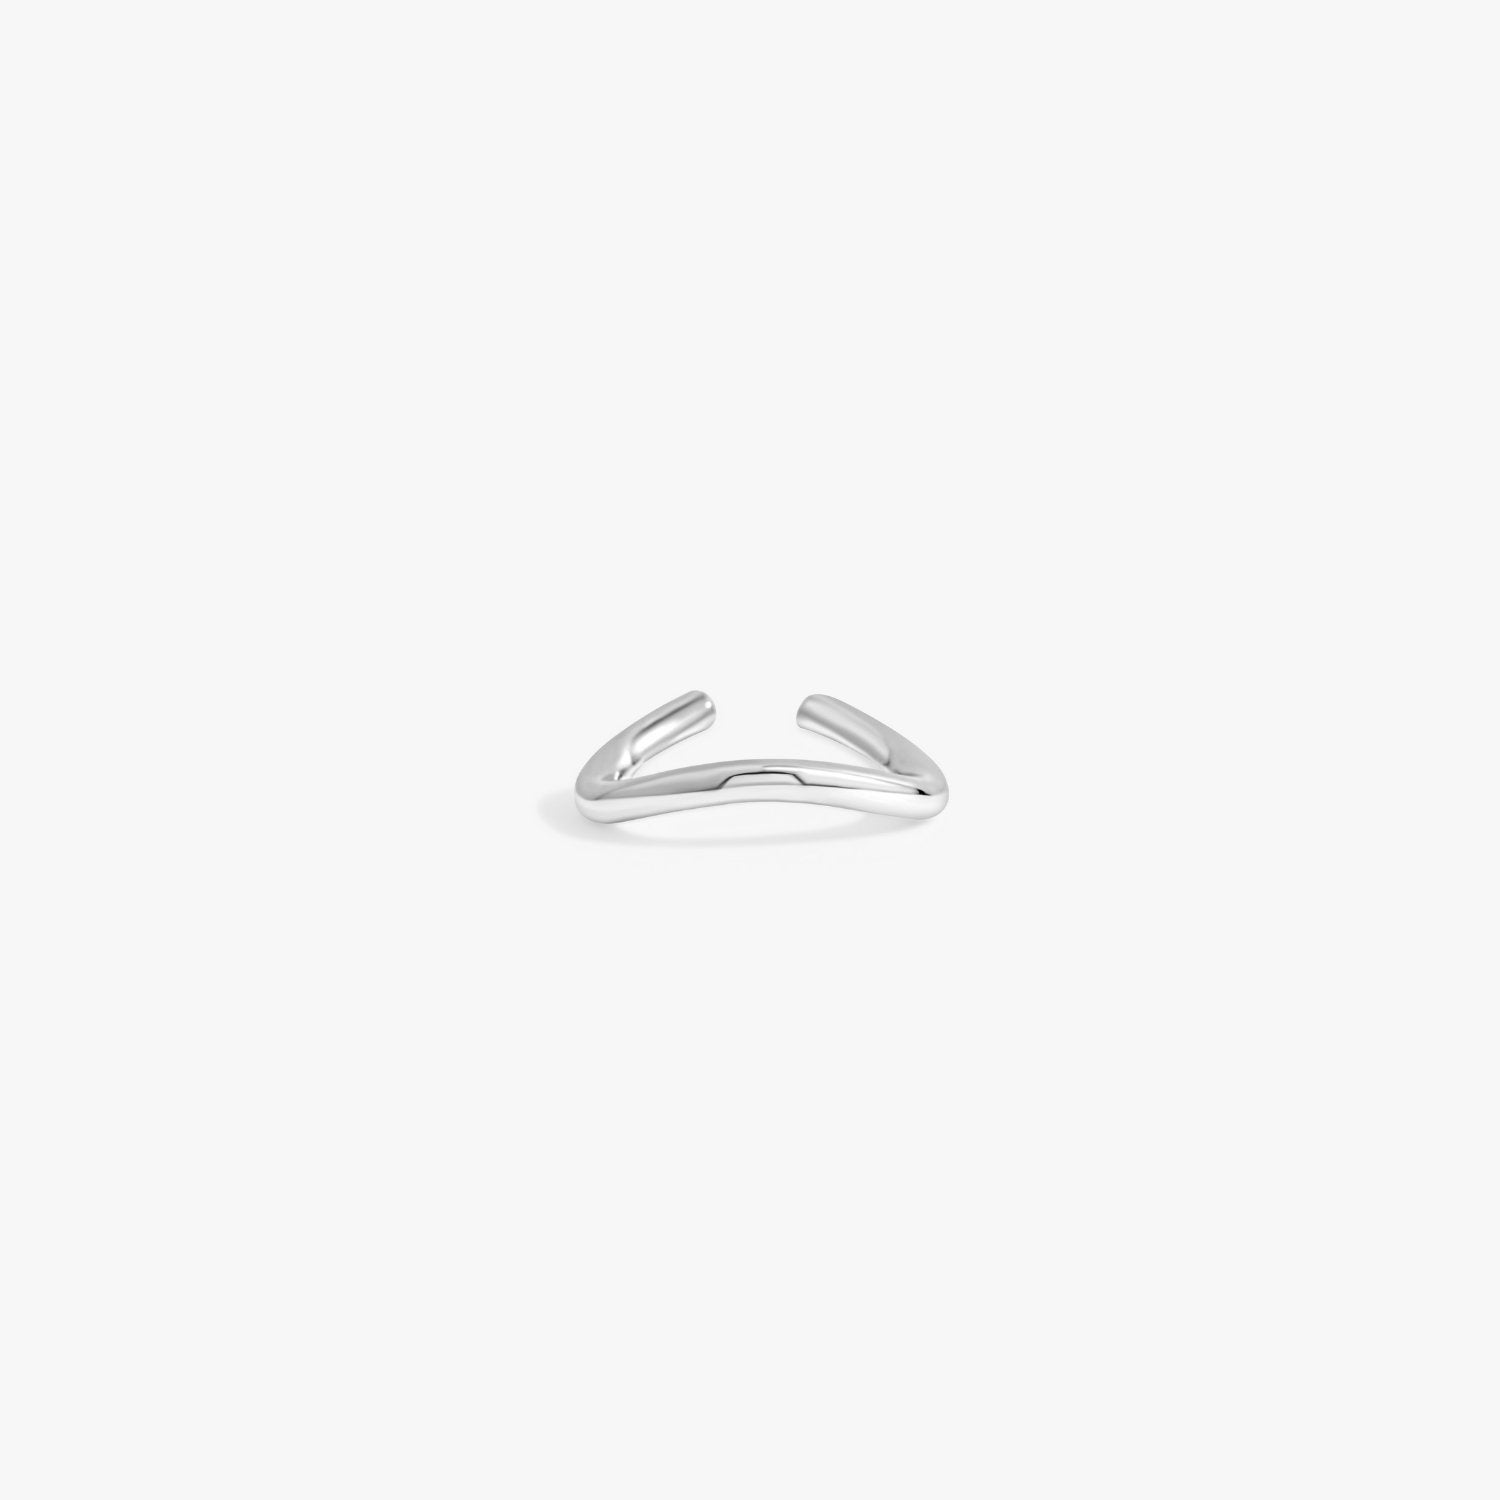 Wavy Pinky Adjustable Sterling Silver Ring - Flaire & Co.